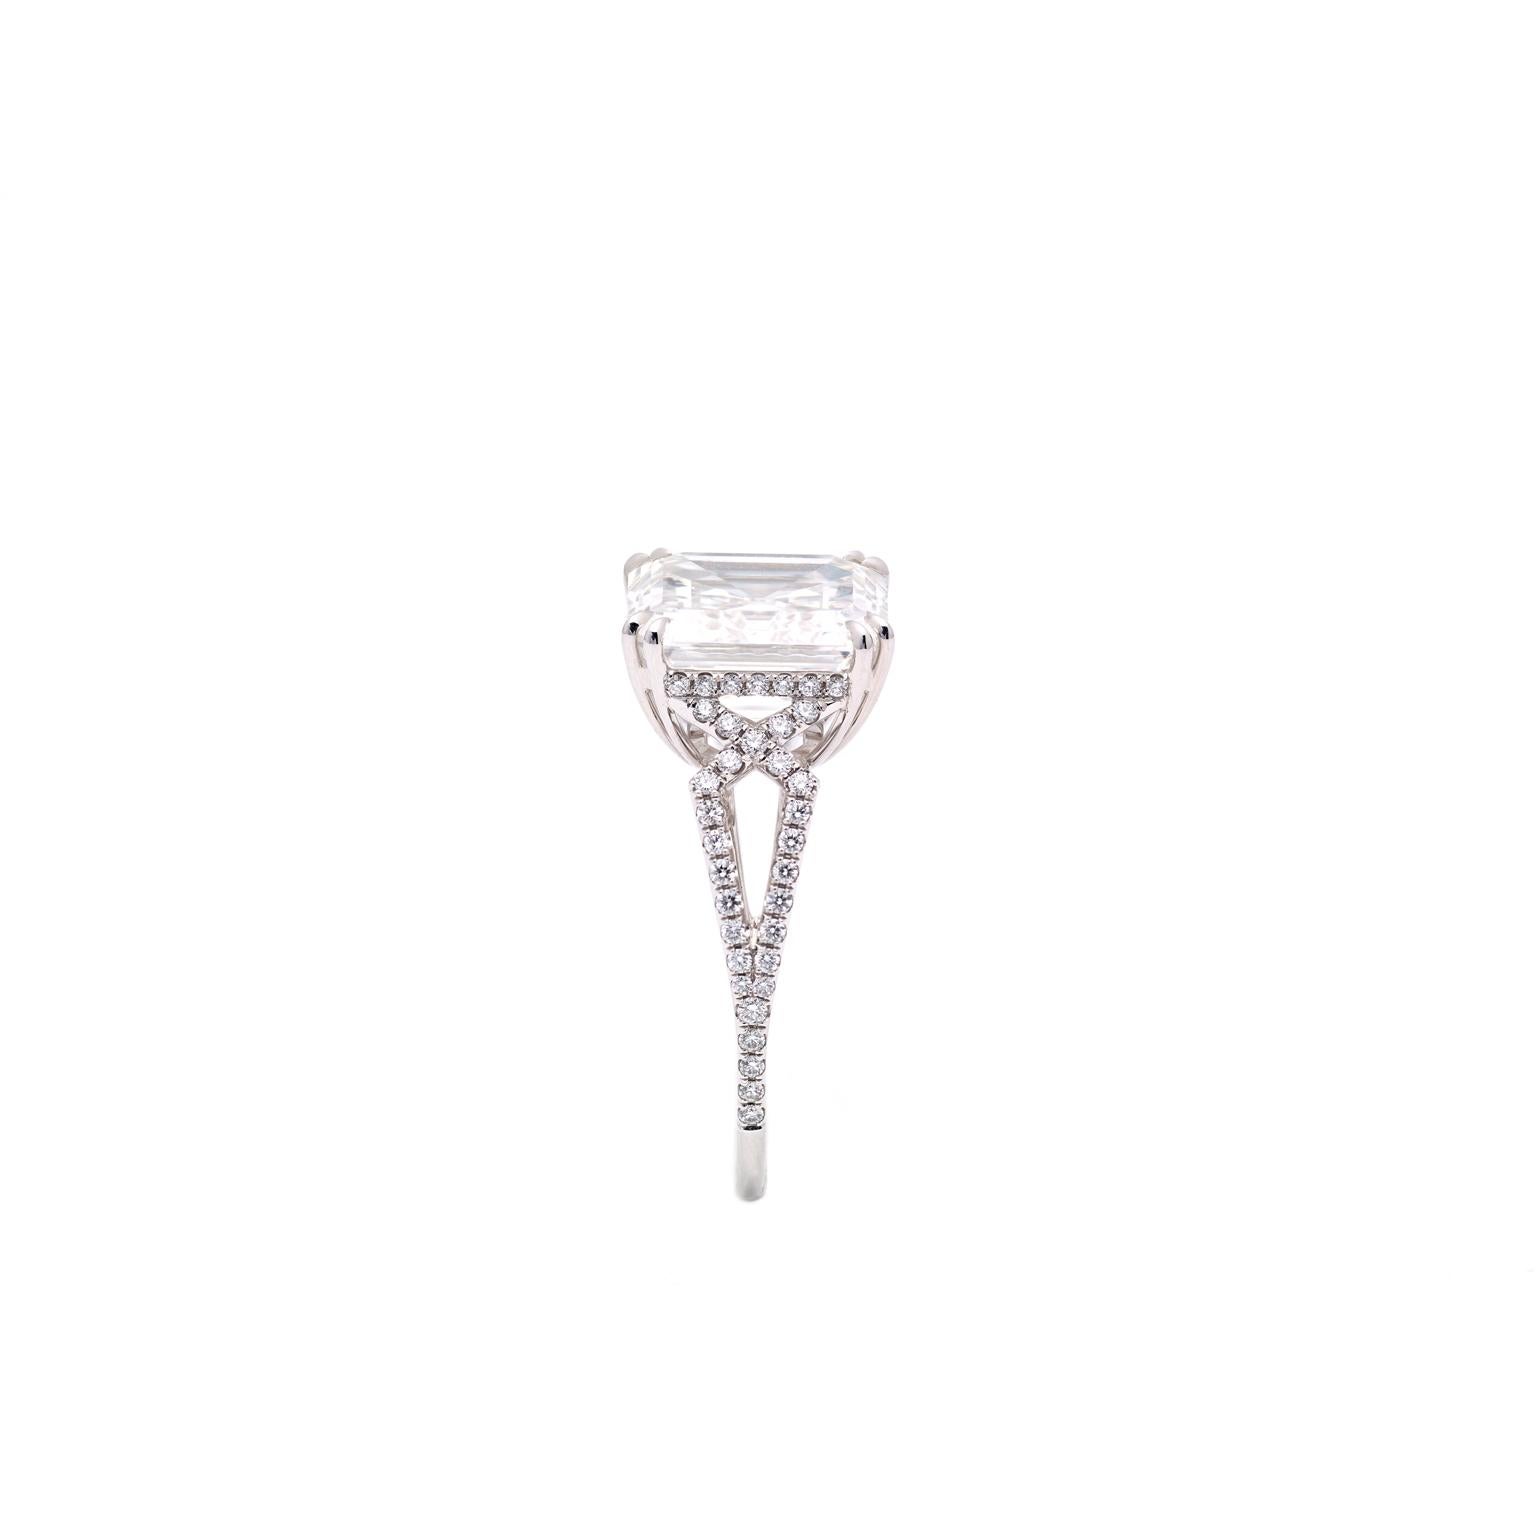 GIA Certified 5 Carat White Diamond, Asscher Cut, G Color, VS1 im Zustand „Neu“ im Angebot in Florence, Tuscany